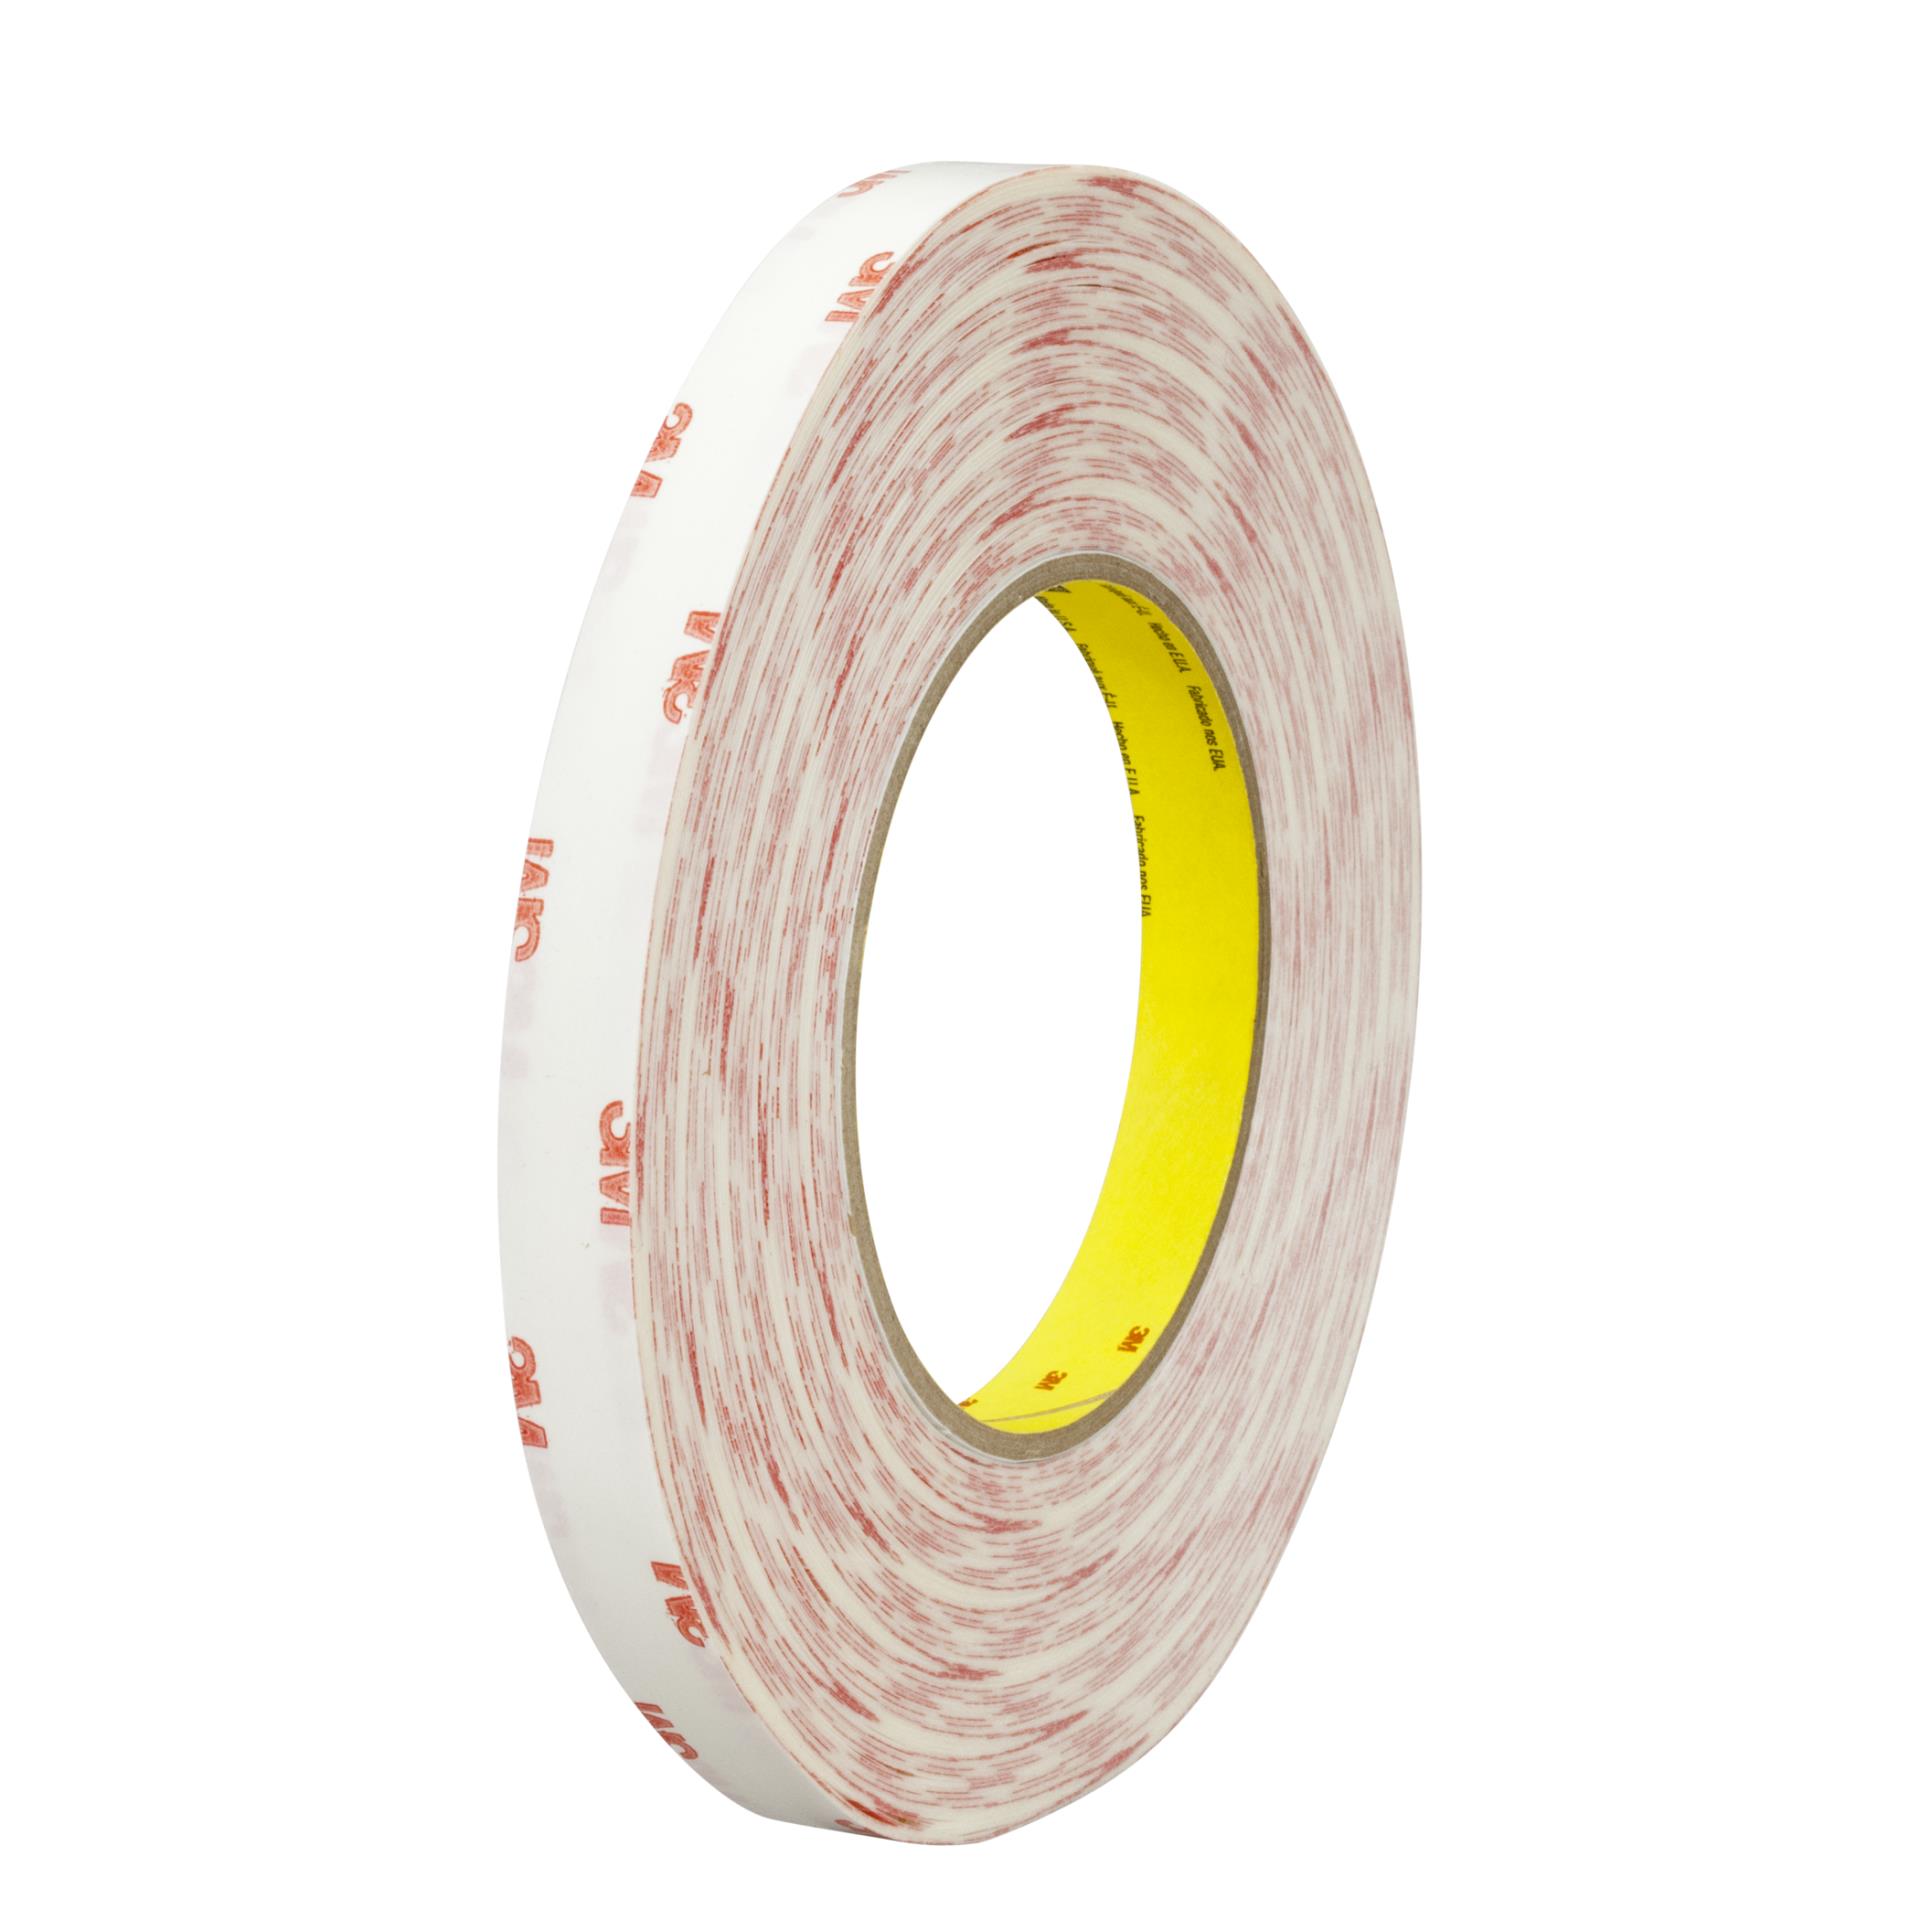 3FT Double-Sided Adhesive Strong Self-Adhesive Hook and Loop Tape